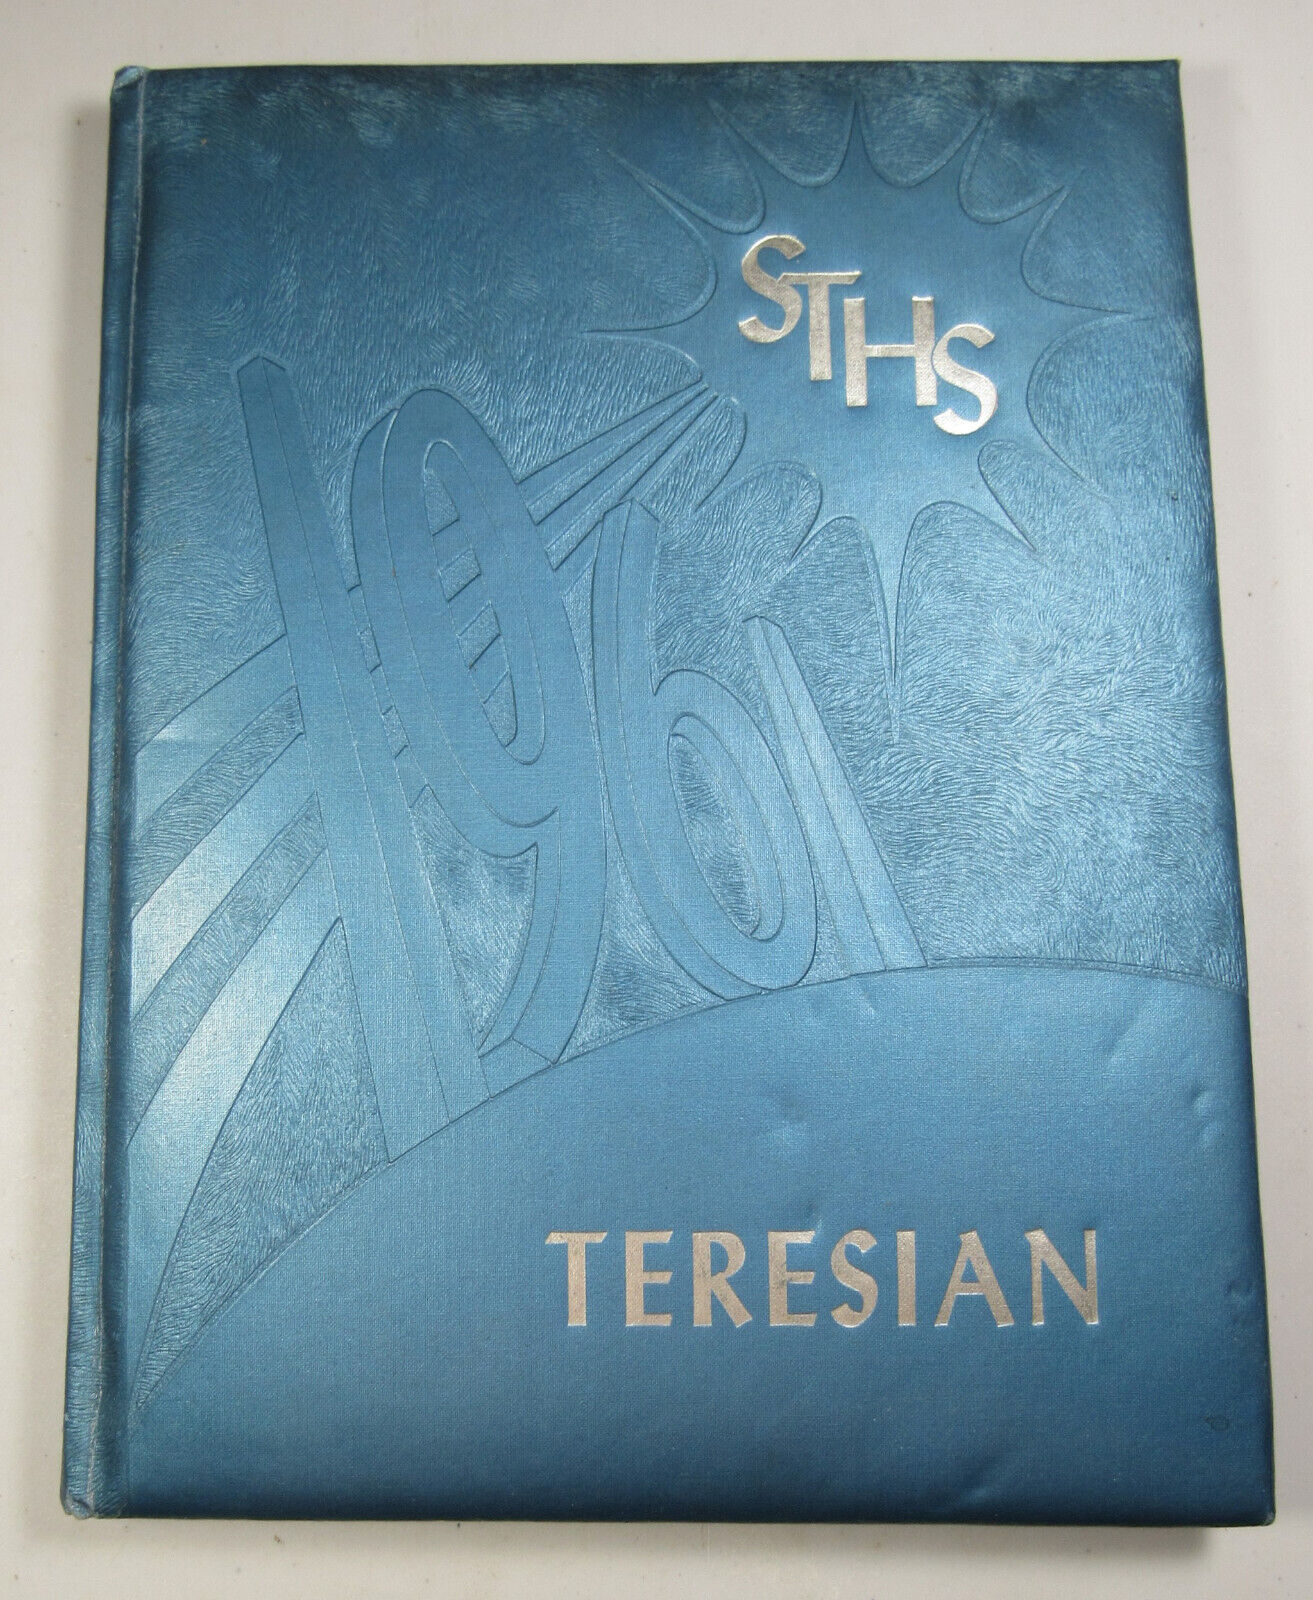 Vintage 1961 St. Teresa High School Yearbook Decatur, IL The Teresian